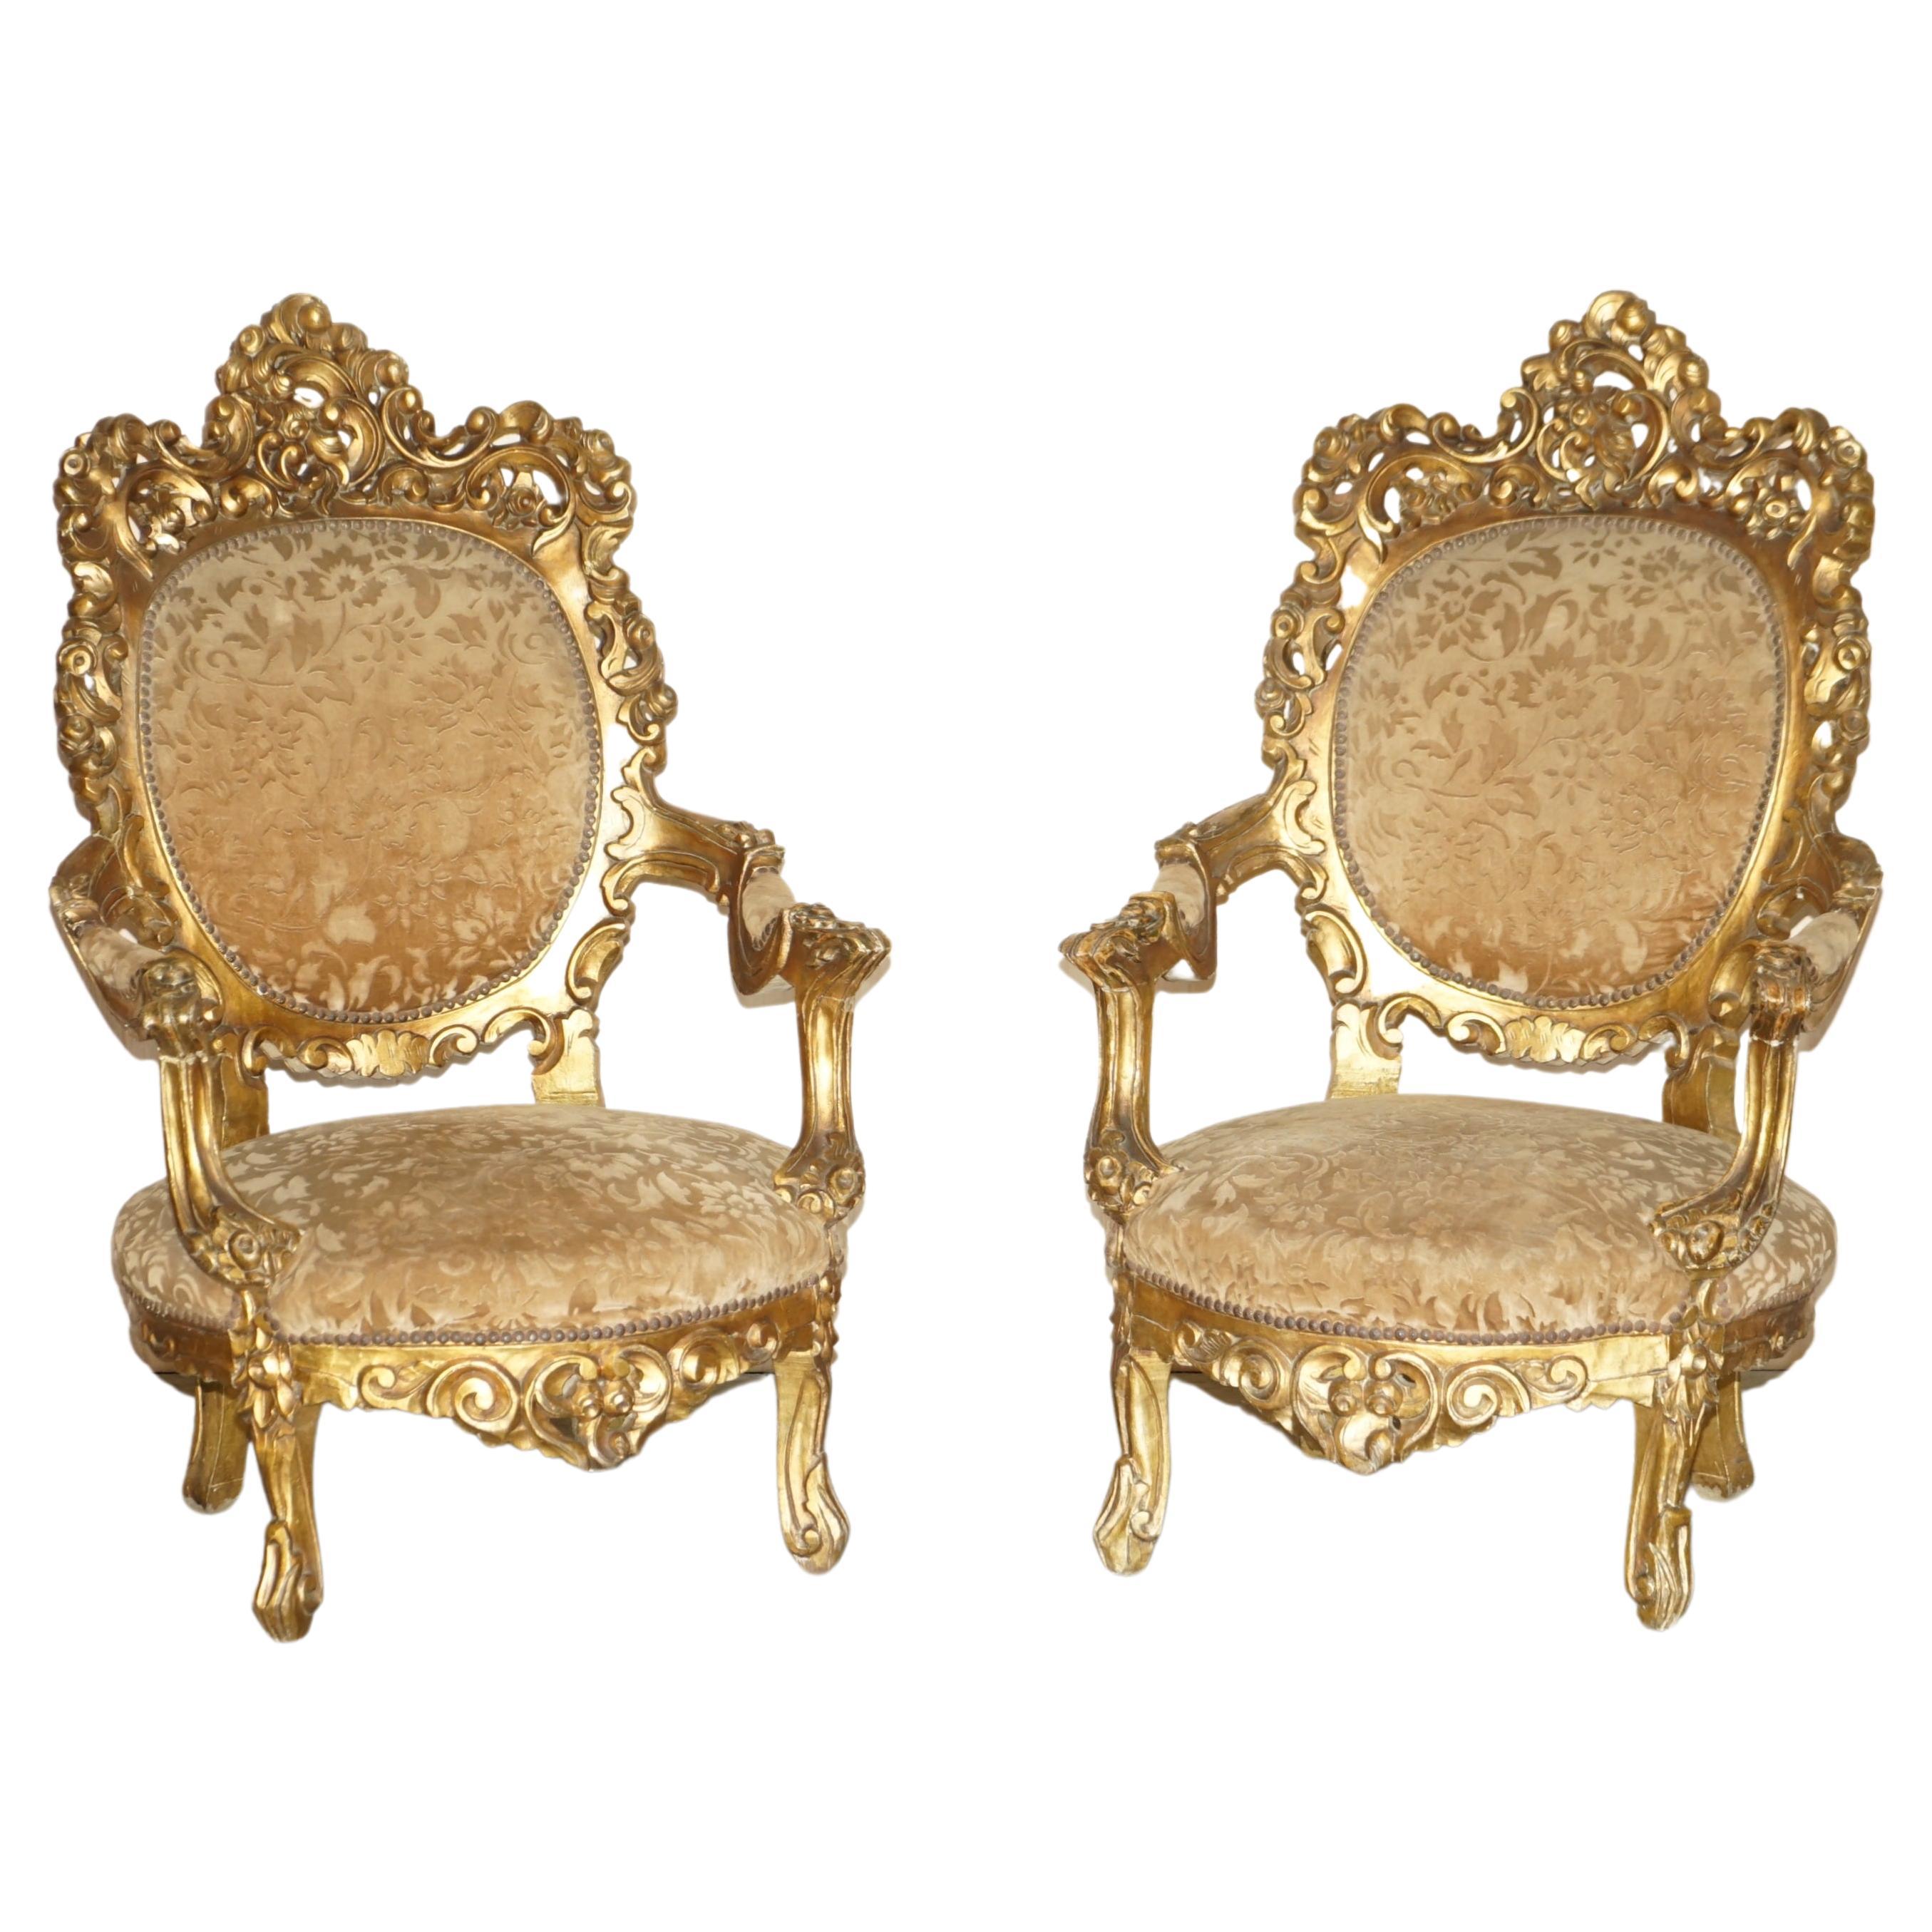 PAIR OF ANTIQUE ORIGINAL GiLTWOOD FINISH FRENCH LOUIS XV FAUTEUILS ARMCHAIRS For Sale